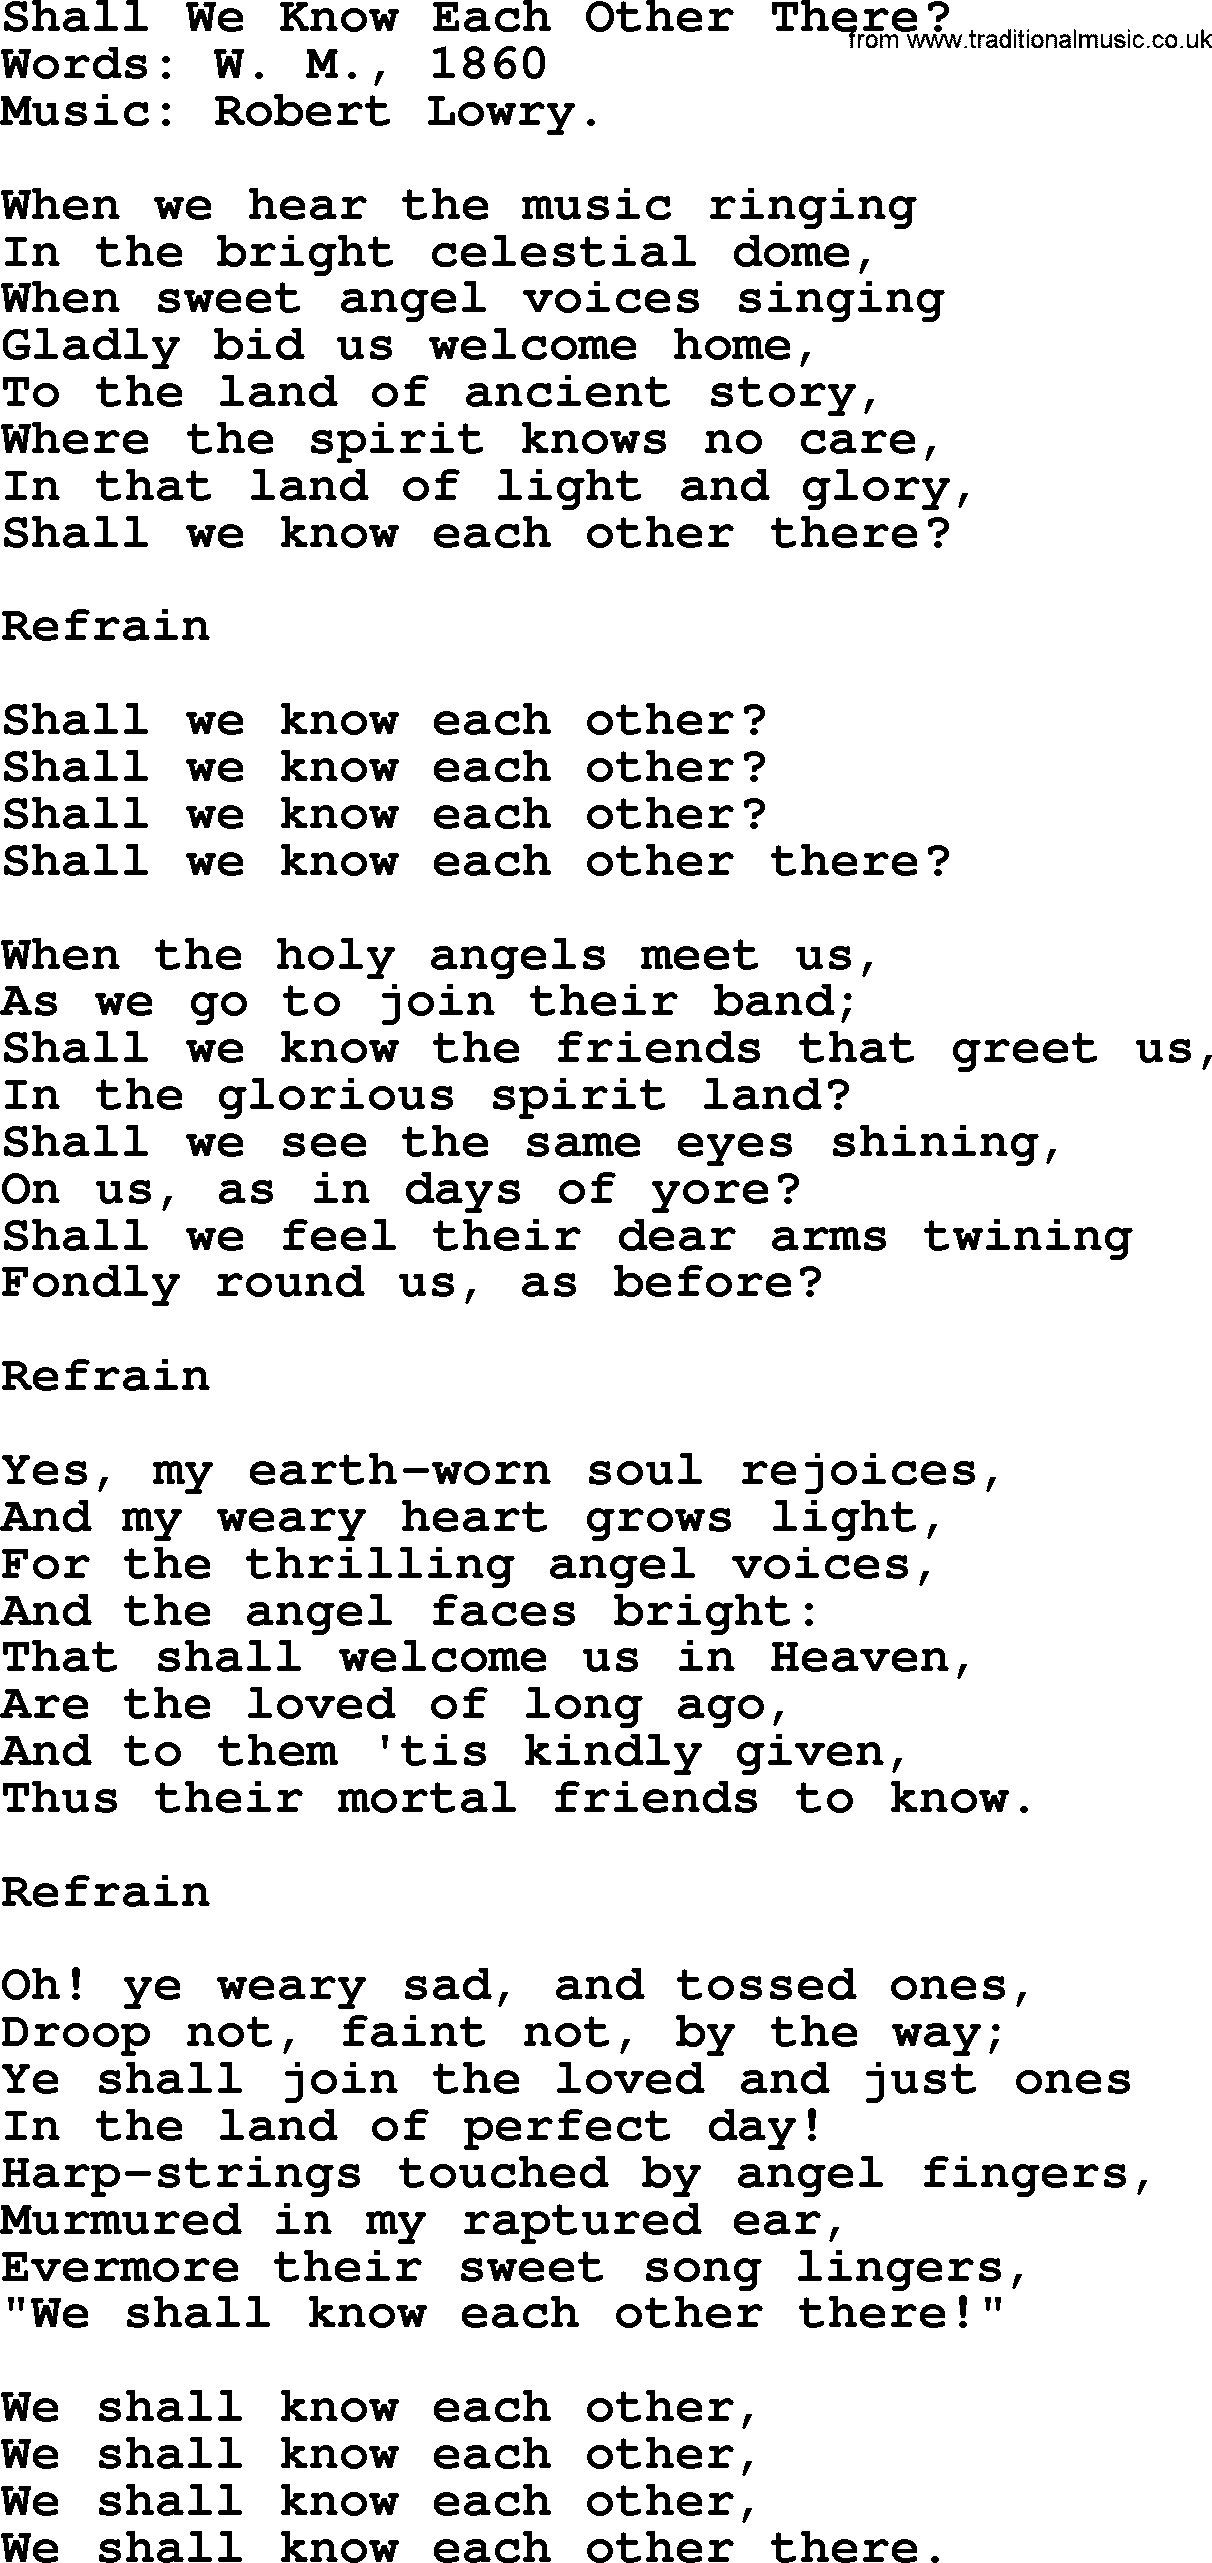 Songs and Hymns about Heaven: Shall We Know Each Other There lyrics with PDF